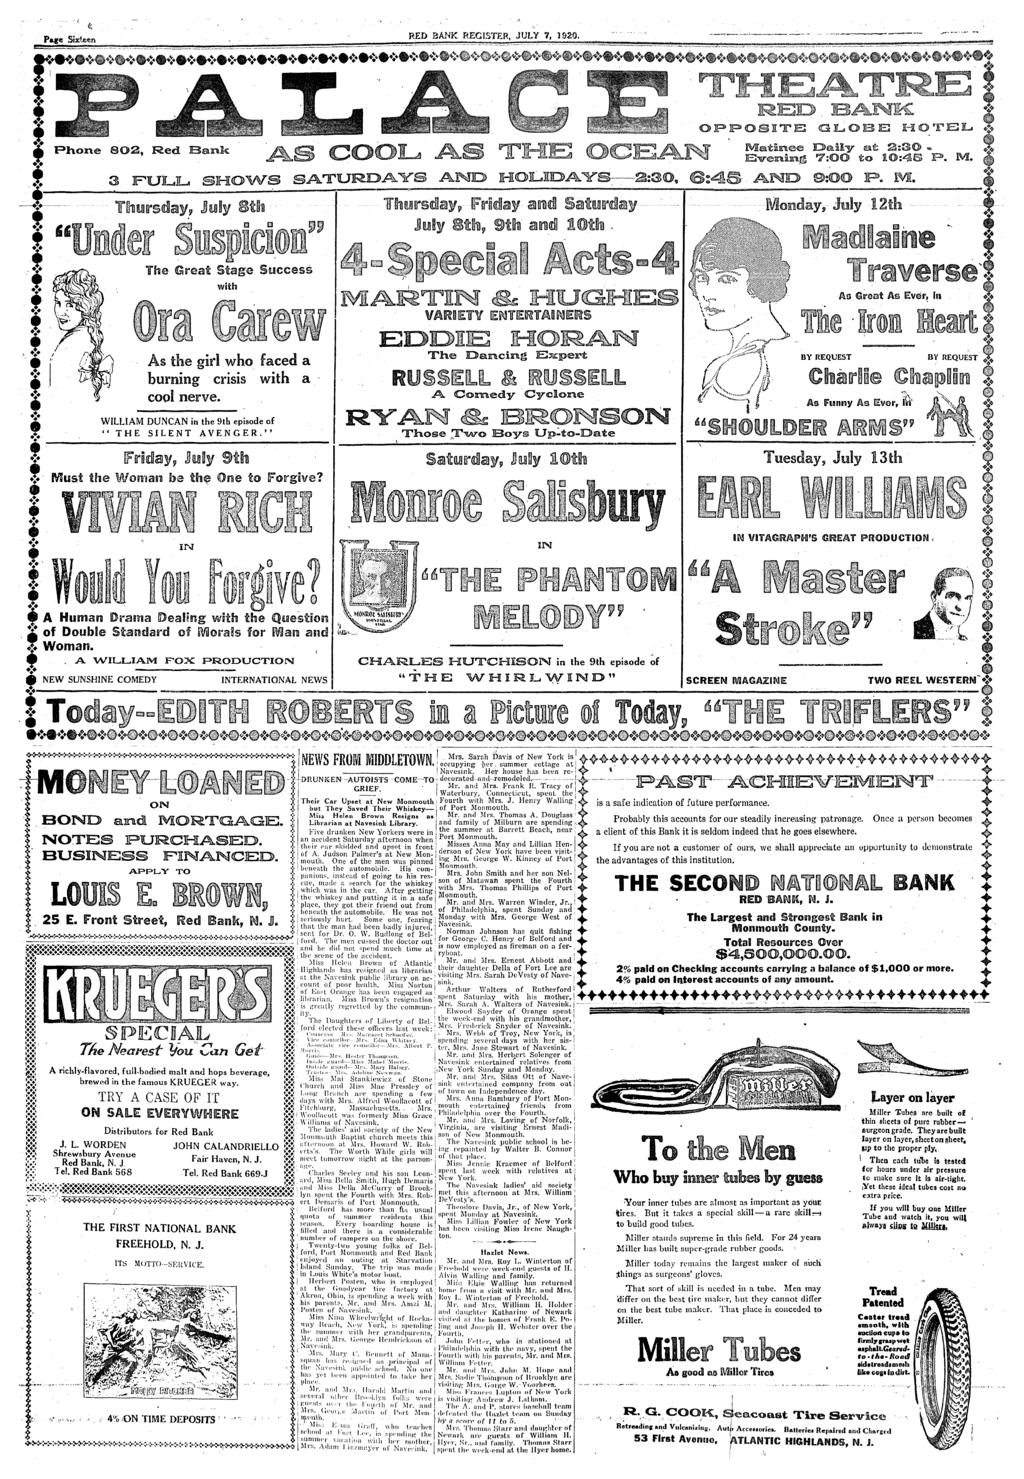 Page Sxeen *#<*#*#*>#*»> ^ RED BANK REGSTER, JULY 7, 1920. Phone 80S, Red Bank J! 3 FULL. SHOWS SATURDAYS A.1M5D) OPPOSTE GLOBE HOTEL J Manee Daly a 2:3 «X Evenng 7:OO o O:4S F 8.